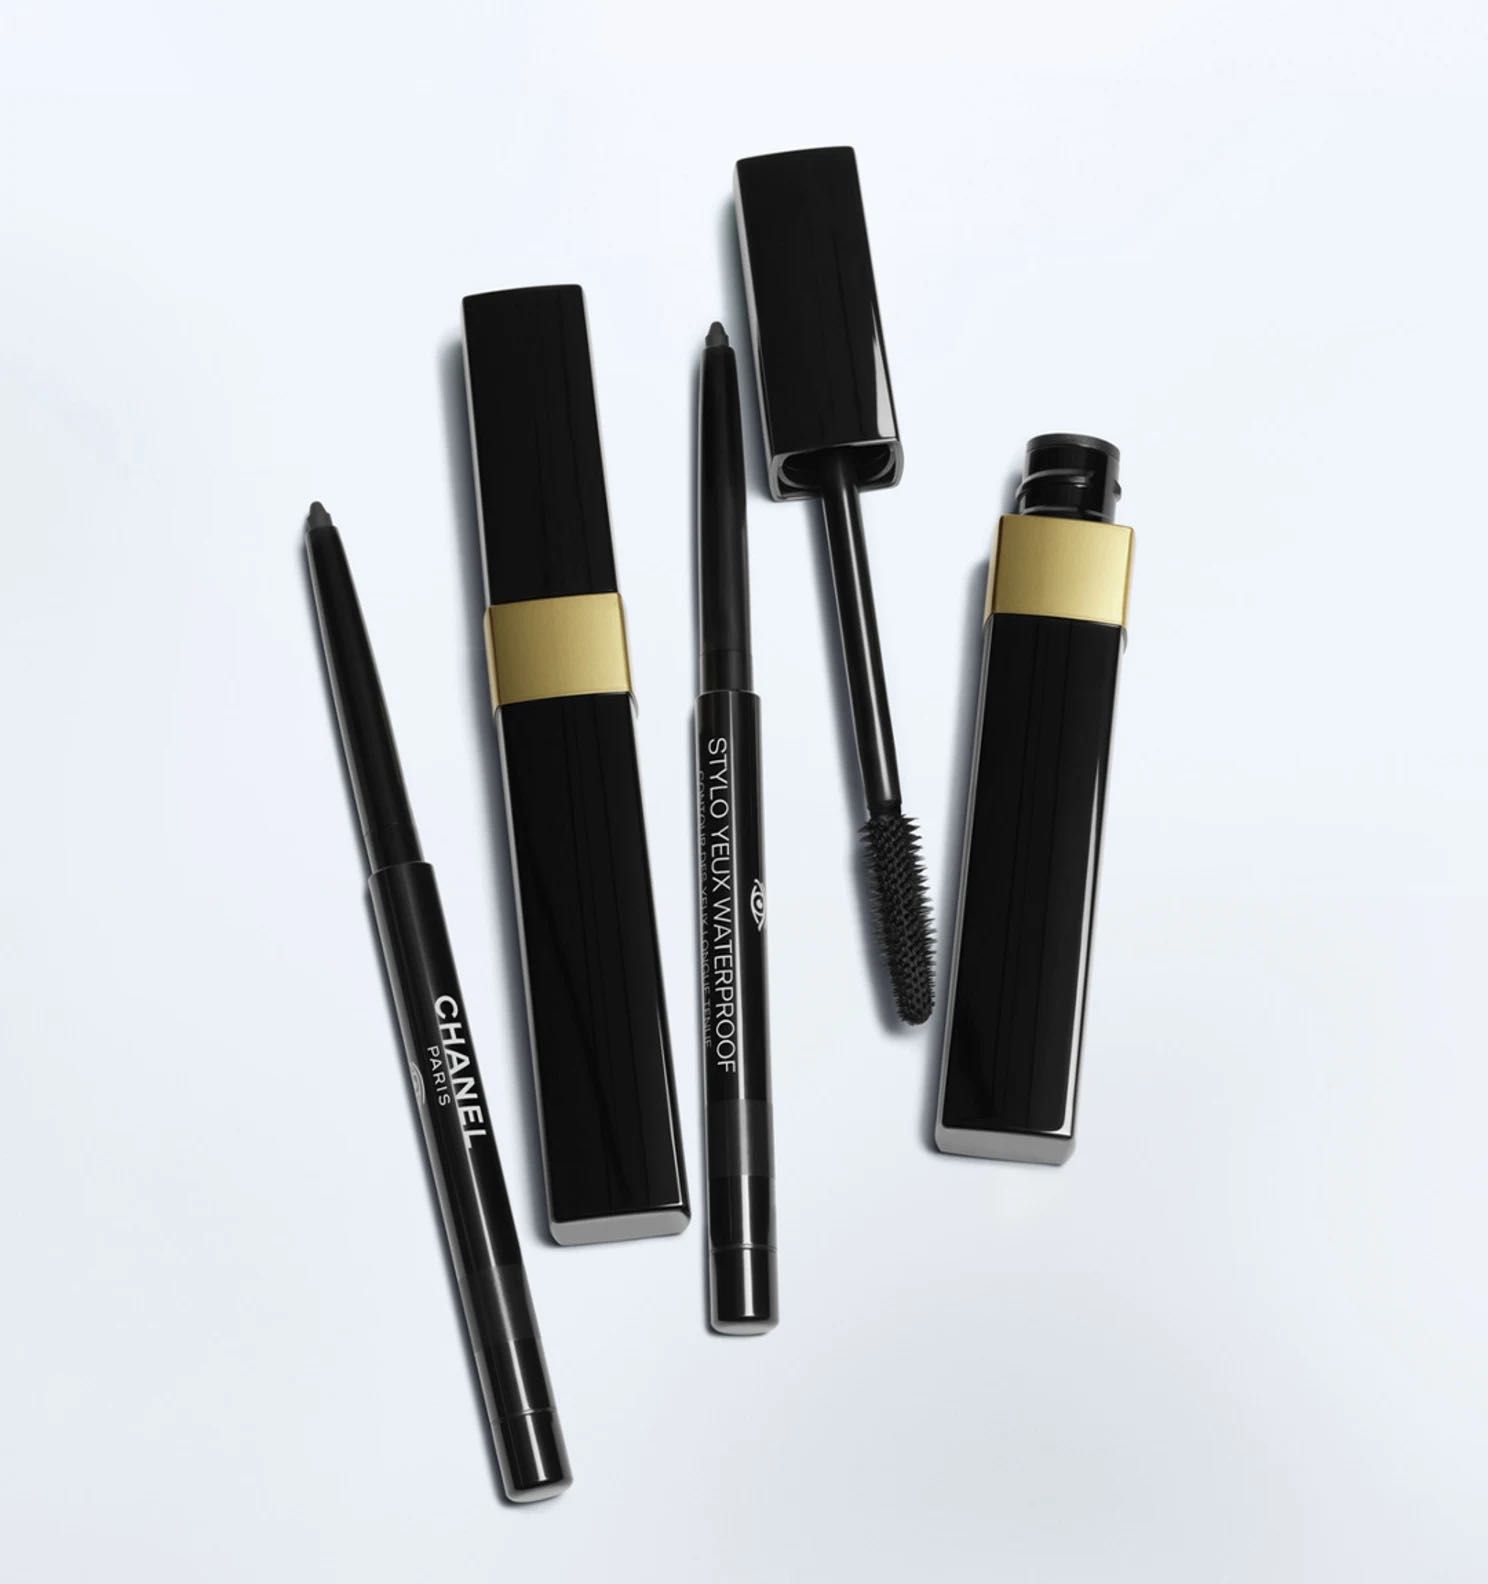 Personal Beauty & Care, Carousell Makeup CHANEL on Face, MASCARA, WATERPROOF INIMITABLE